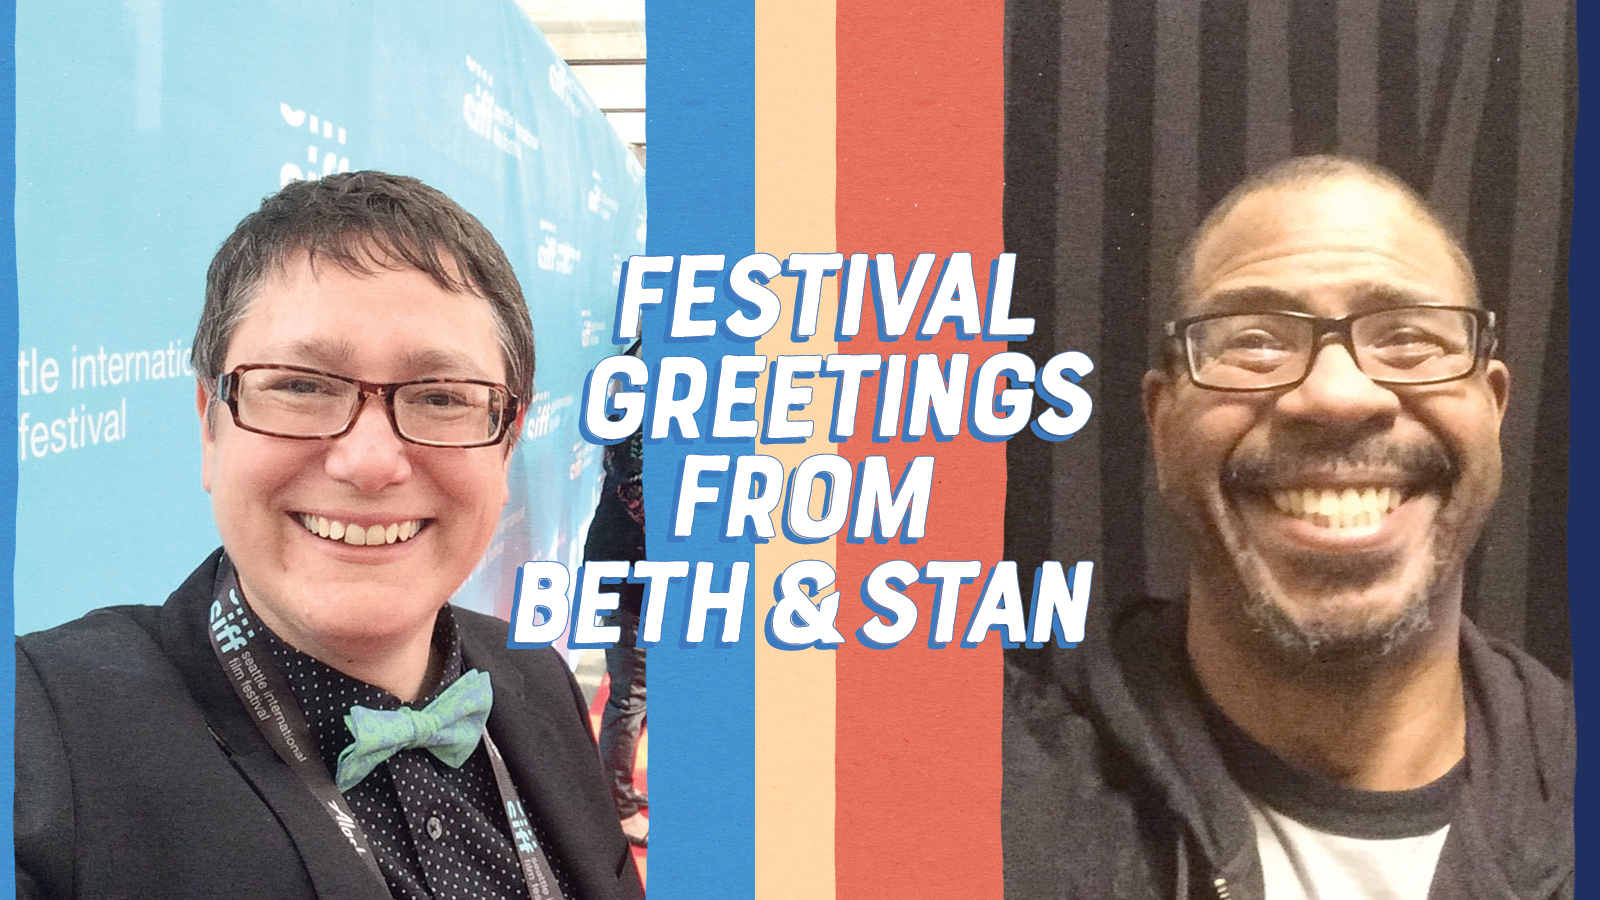 Festival Greetings from Beth & Stan